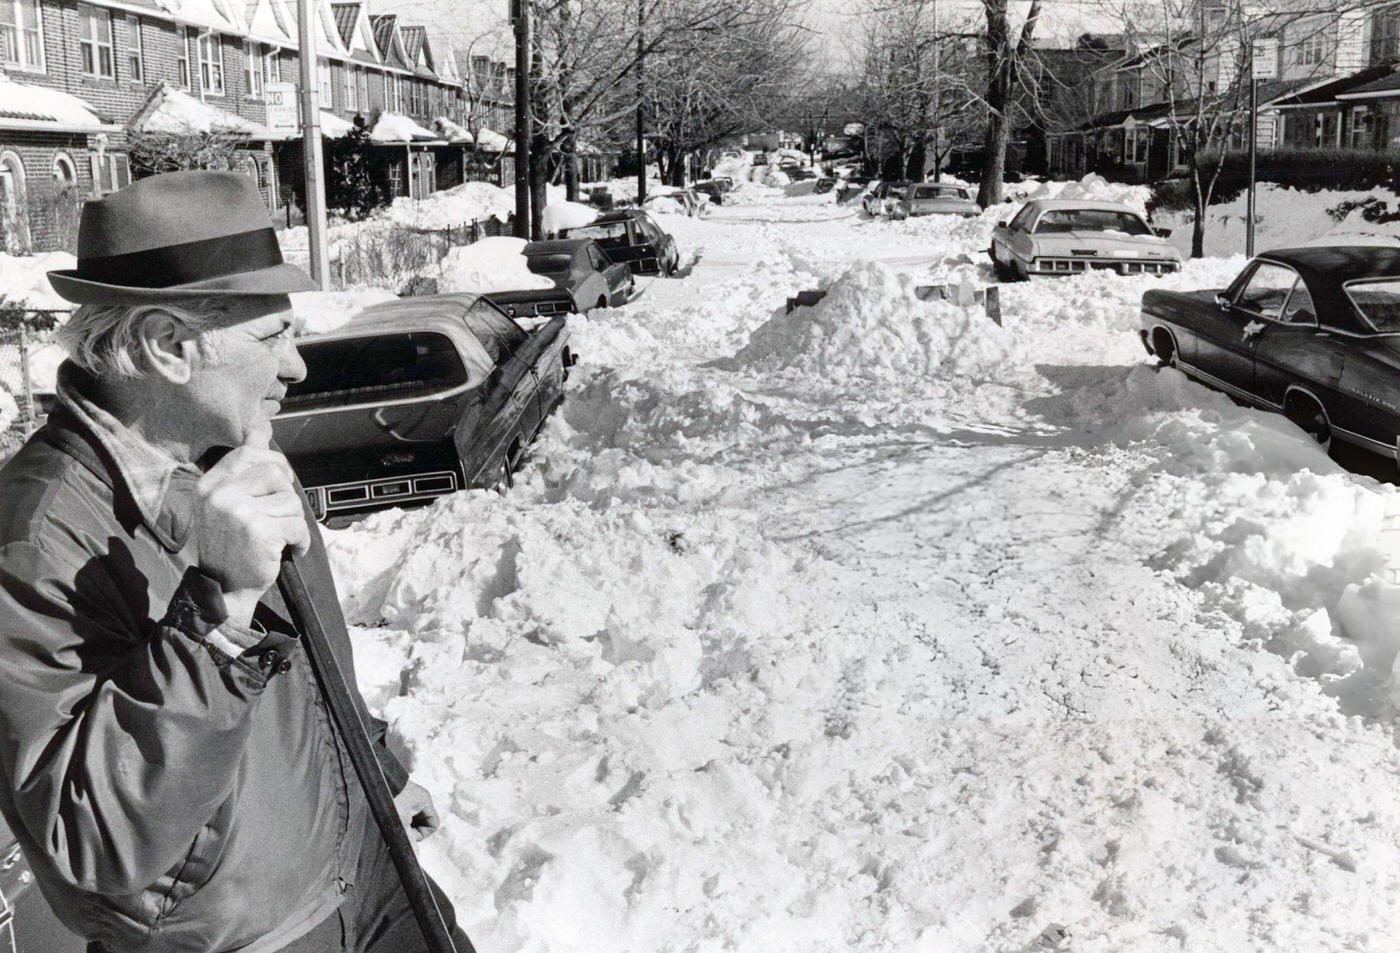 A Resident Of Jamaica, Queens, New York, Looks At The Snow Covering His Street In February, 1978.